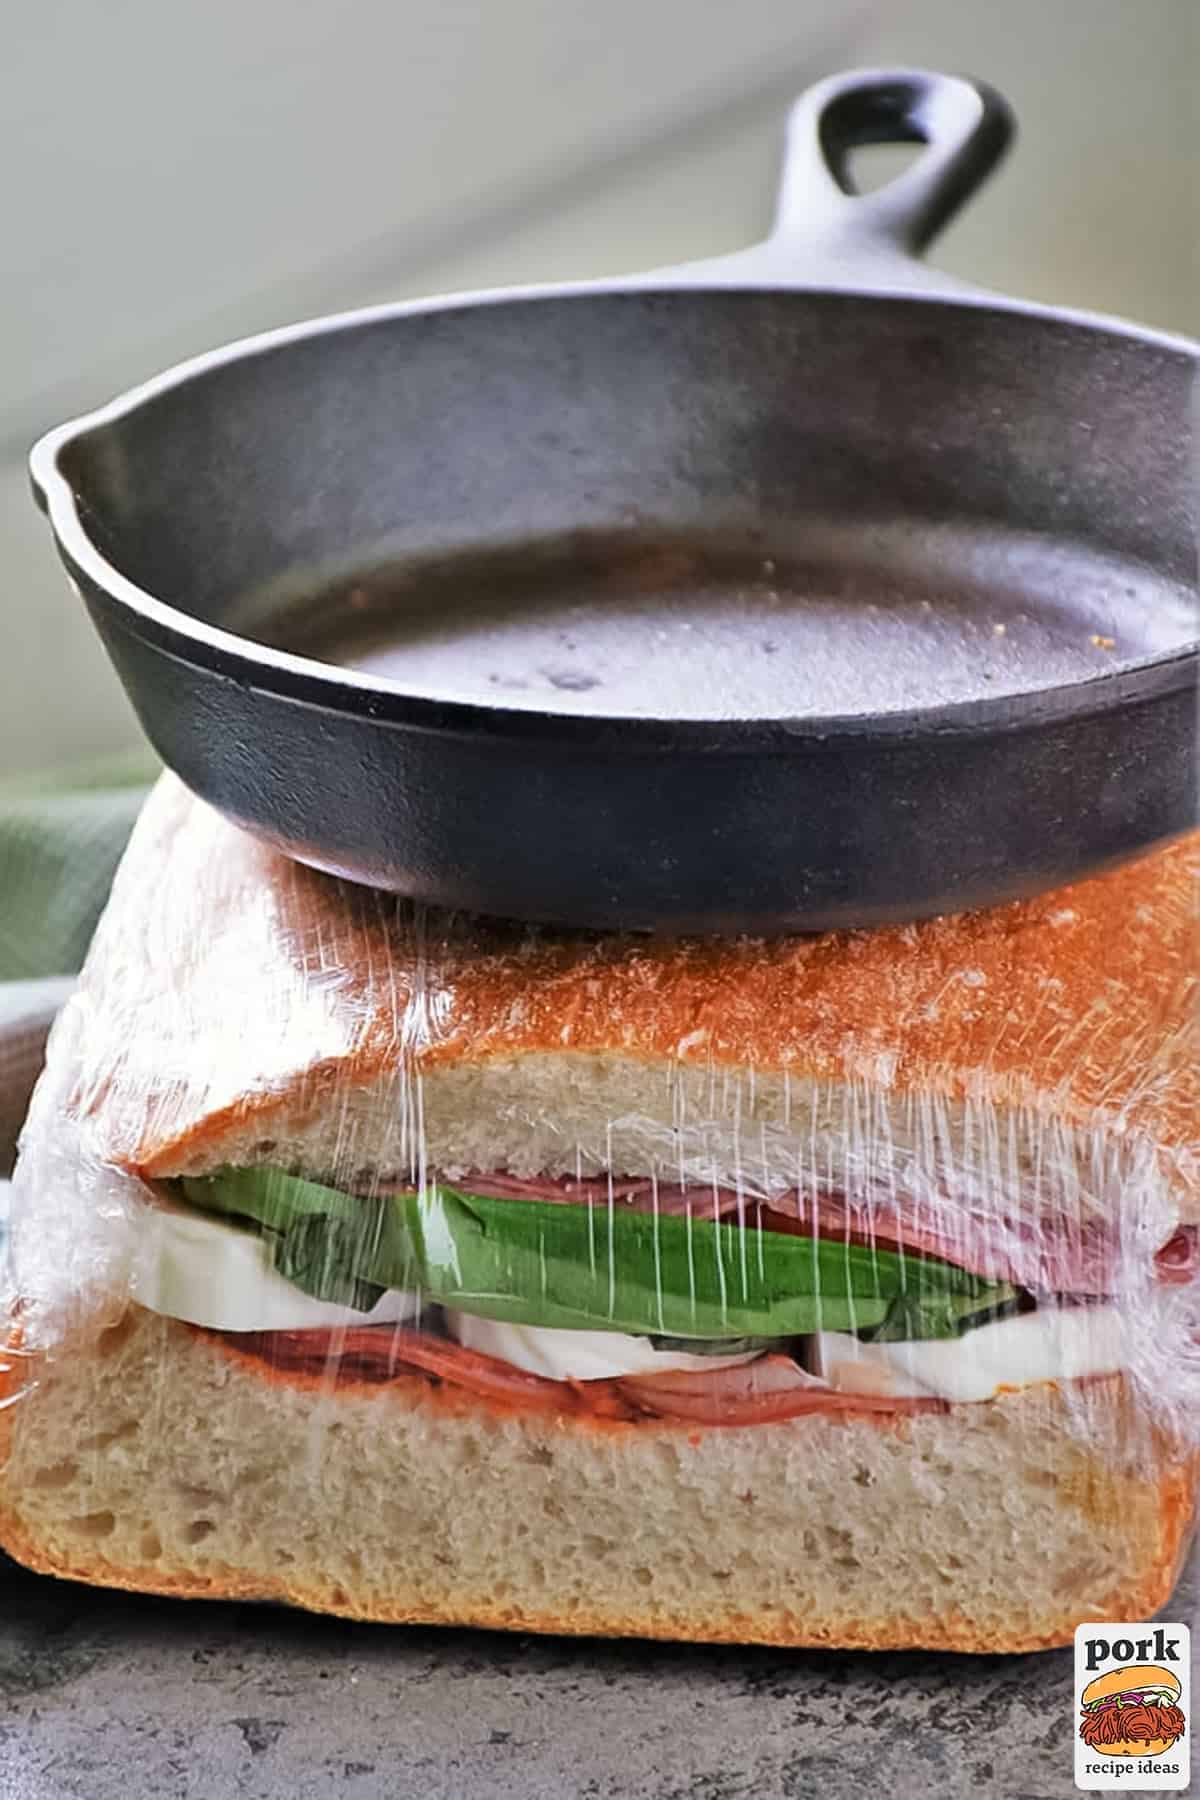 an italian sandwich wrapped in plastic and being pressed under a cast iron pan